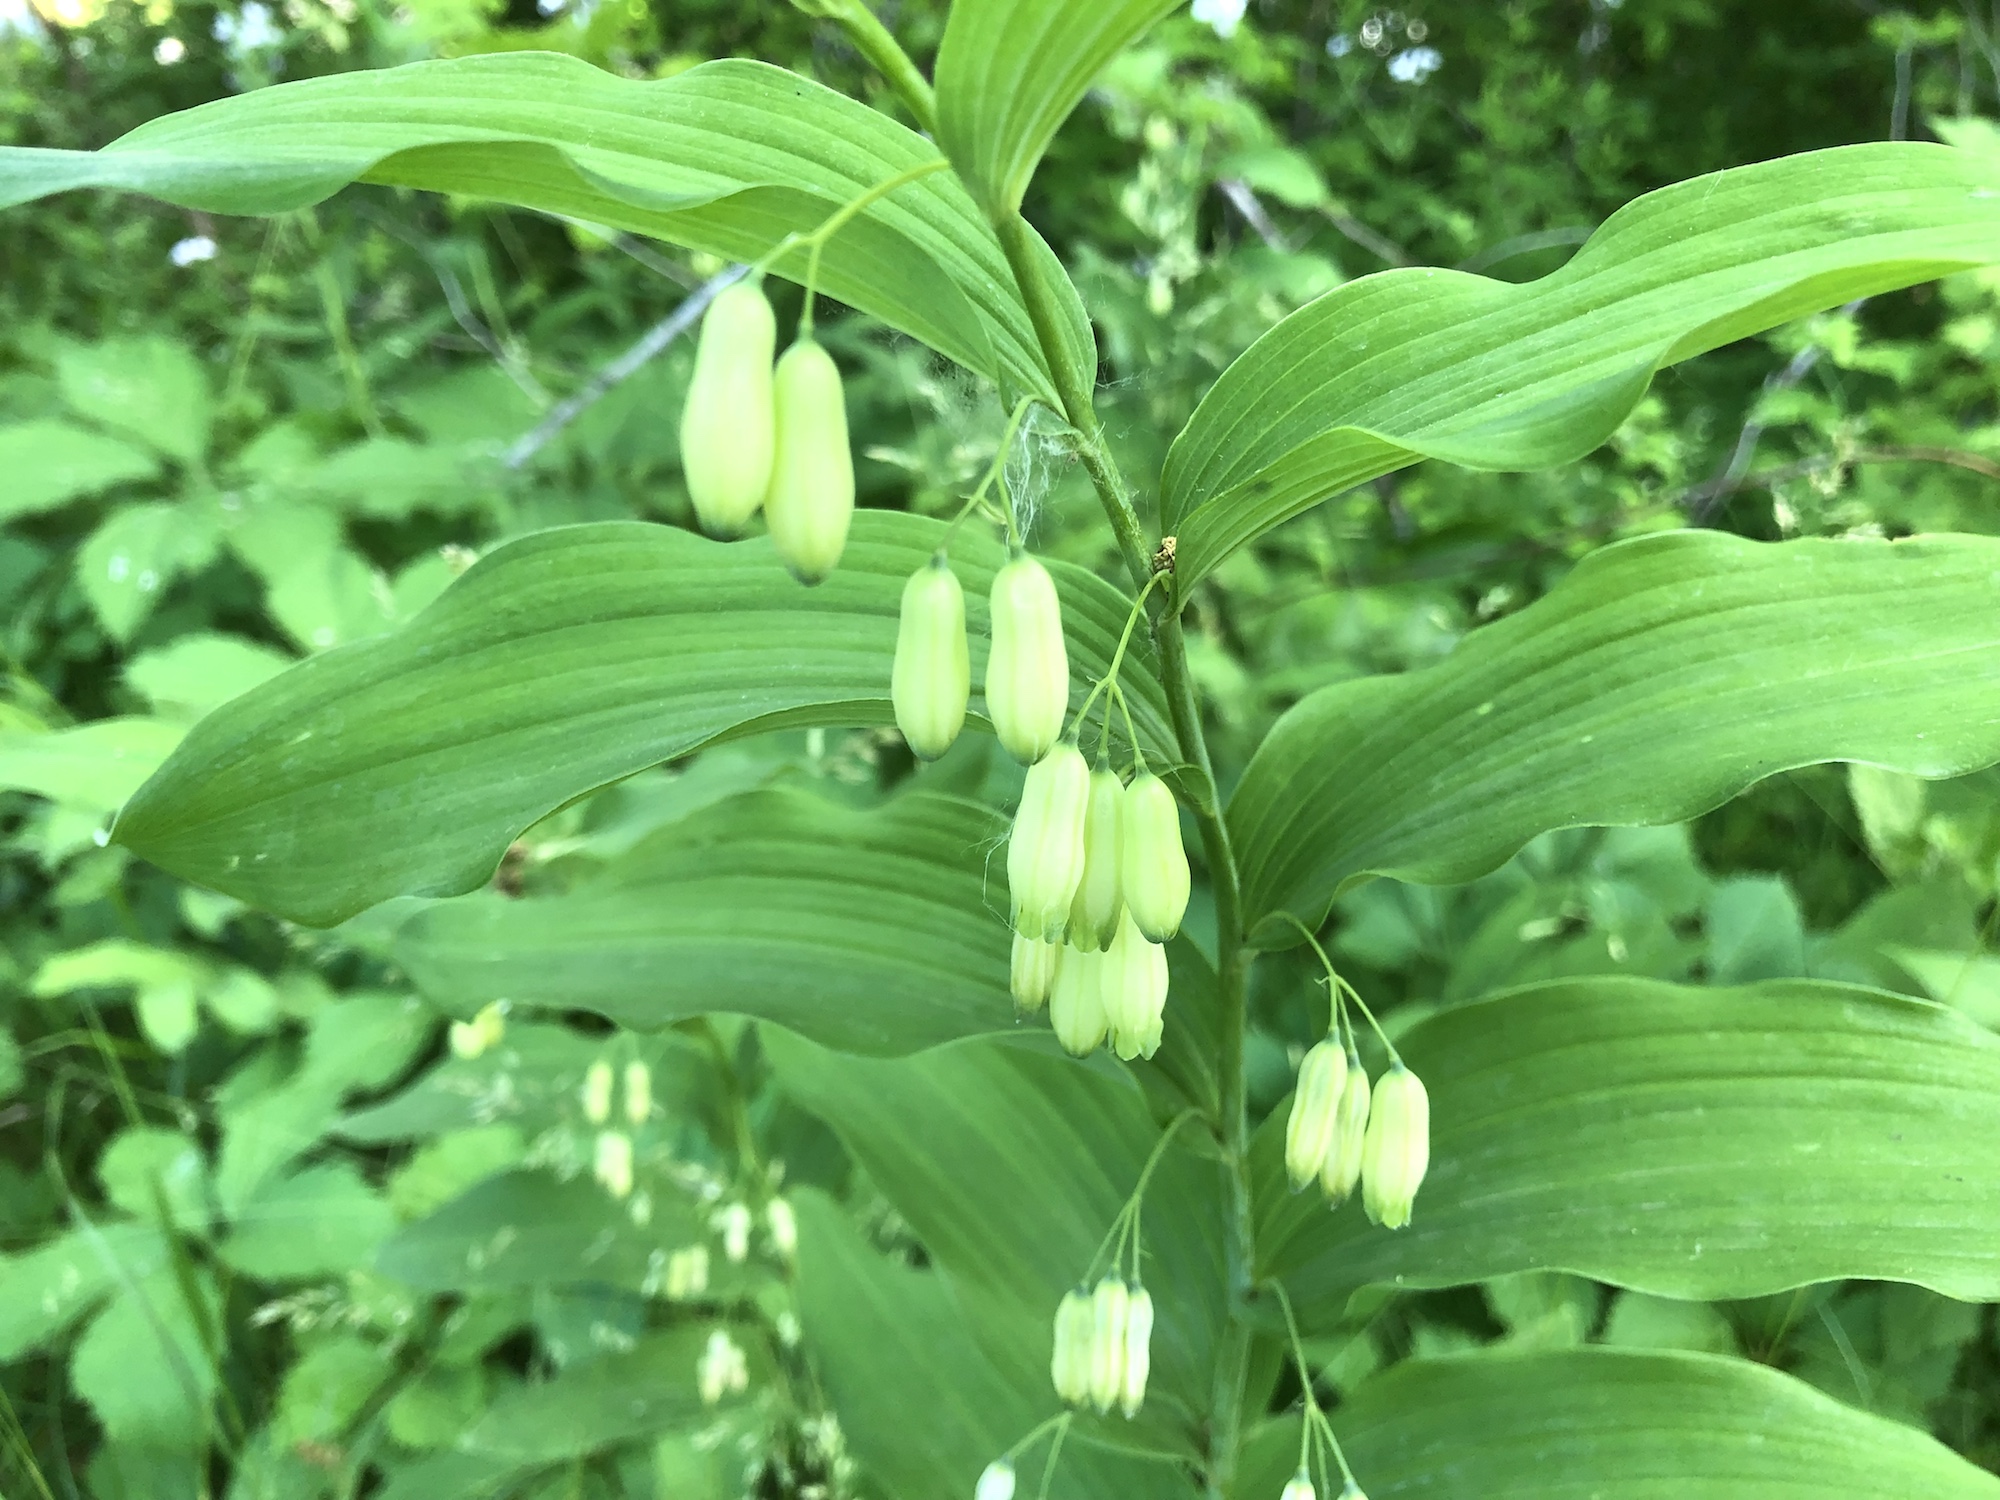 Solomon's Seal in yard off of Nakoma Road in Madison, Wisconsin on June 11, 2019.